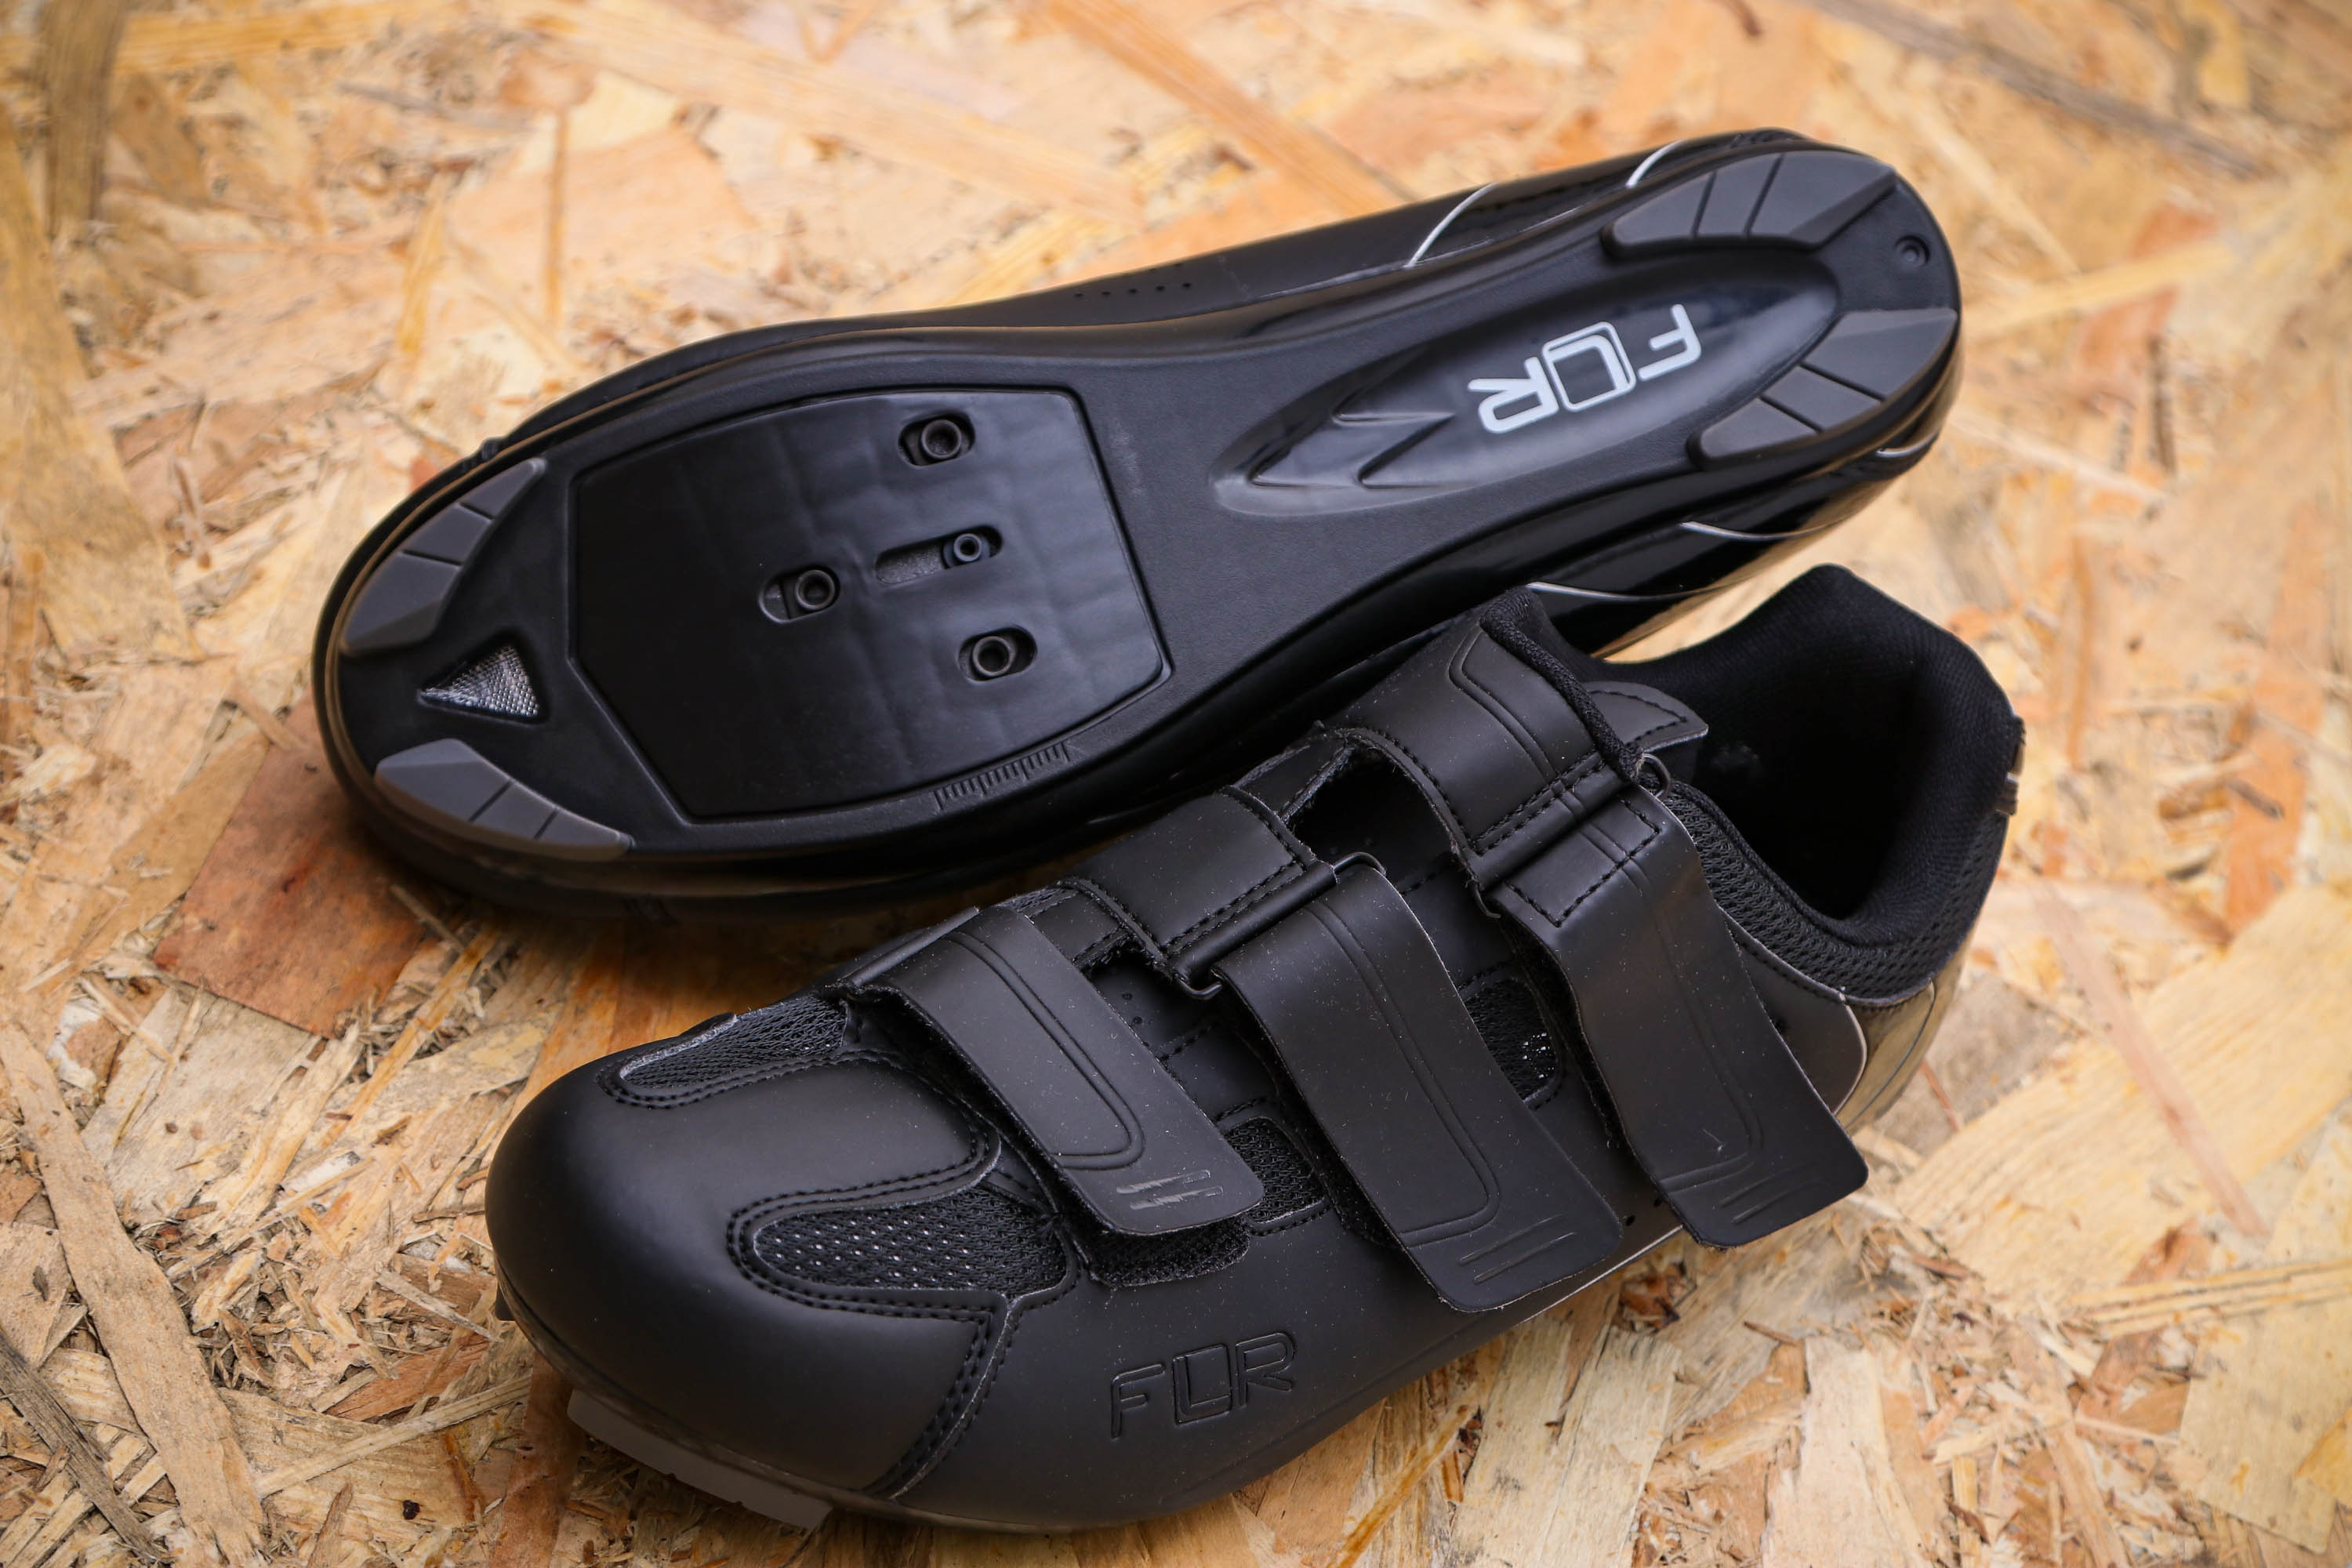 Total 87+ imagen flr cycling shoes review